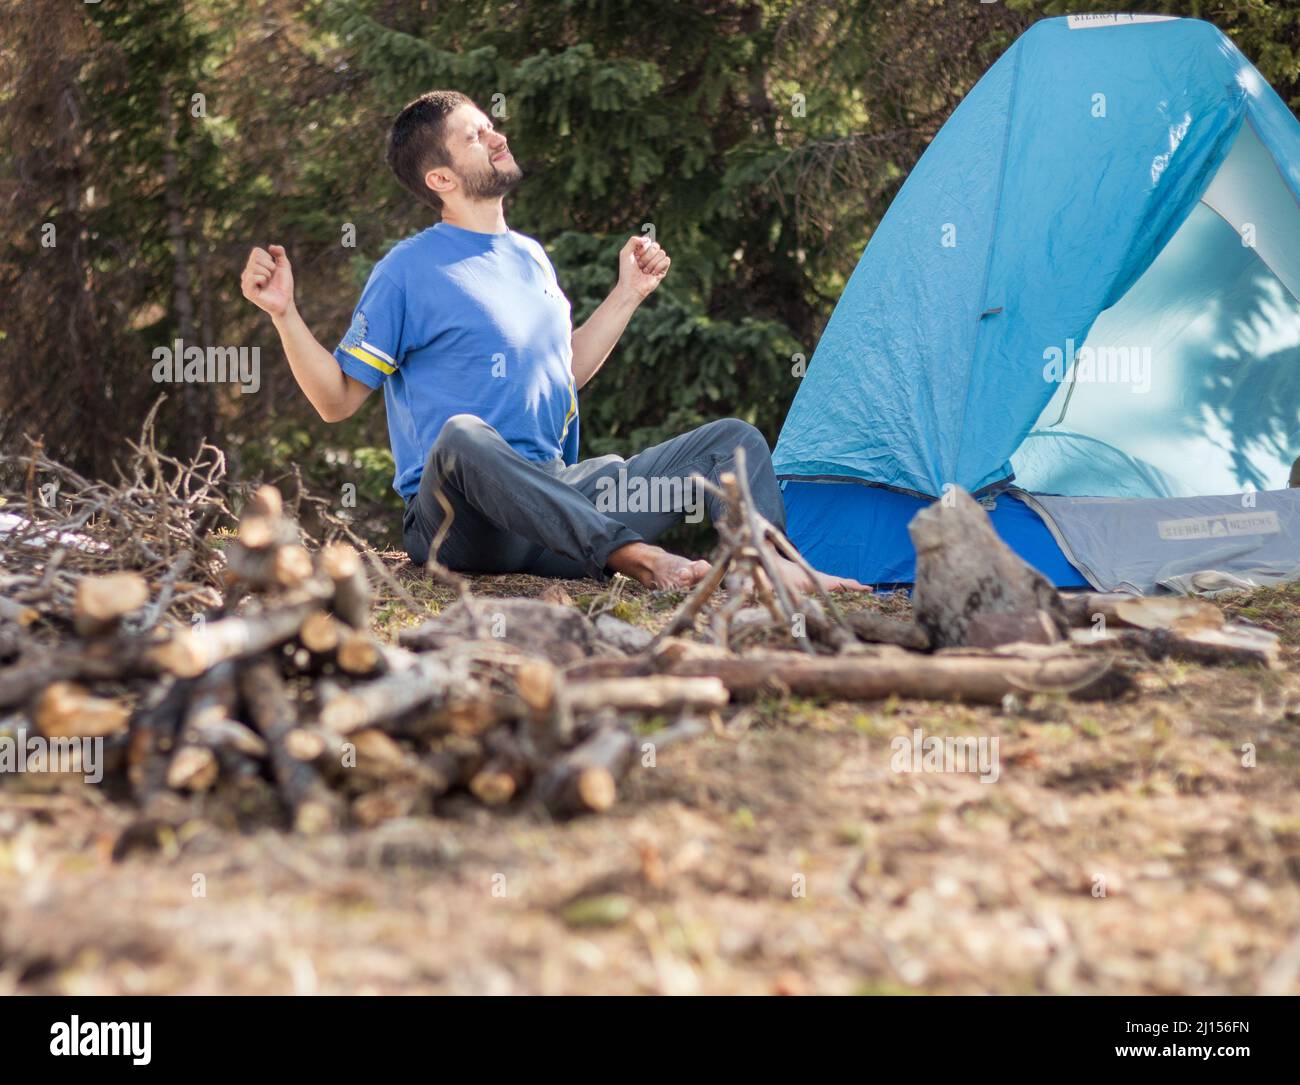 Outdoorsy guy stretching at campsite in the forest Stock Photo